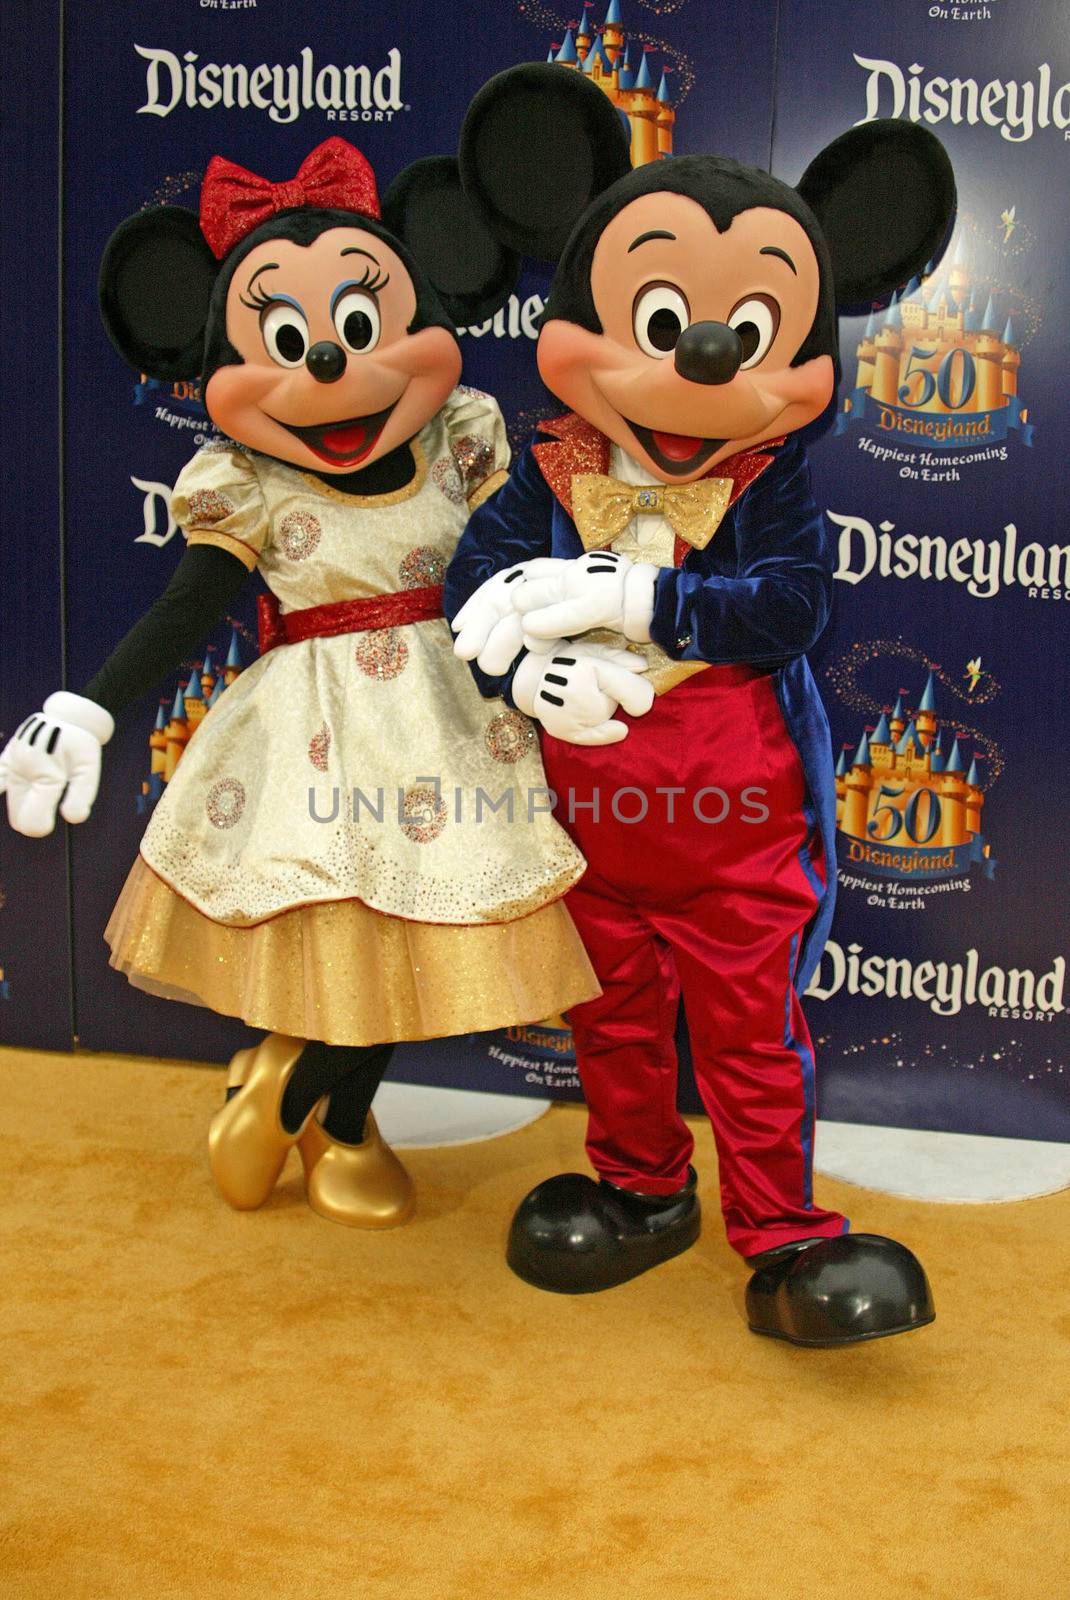 Disneyland's 50th Anniversary "Happiest Homecoming On Earth" by ImageCollect